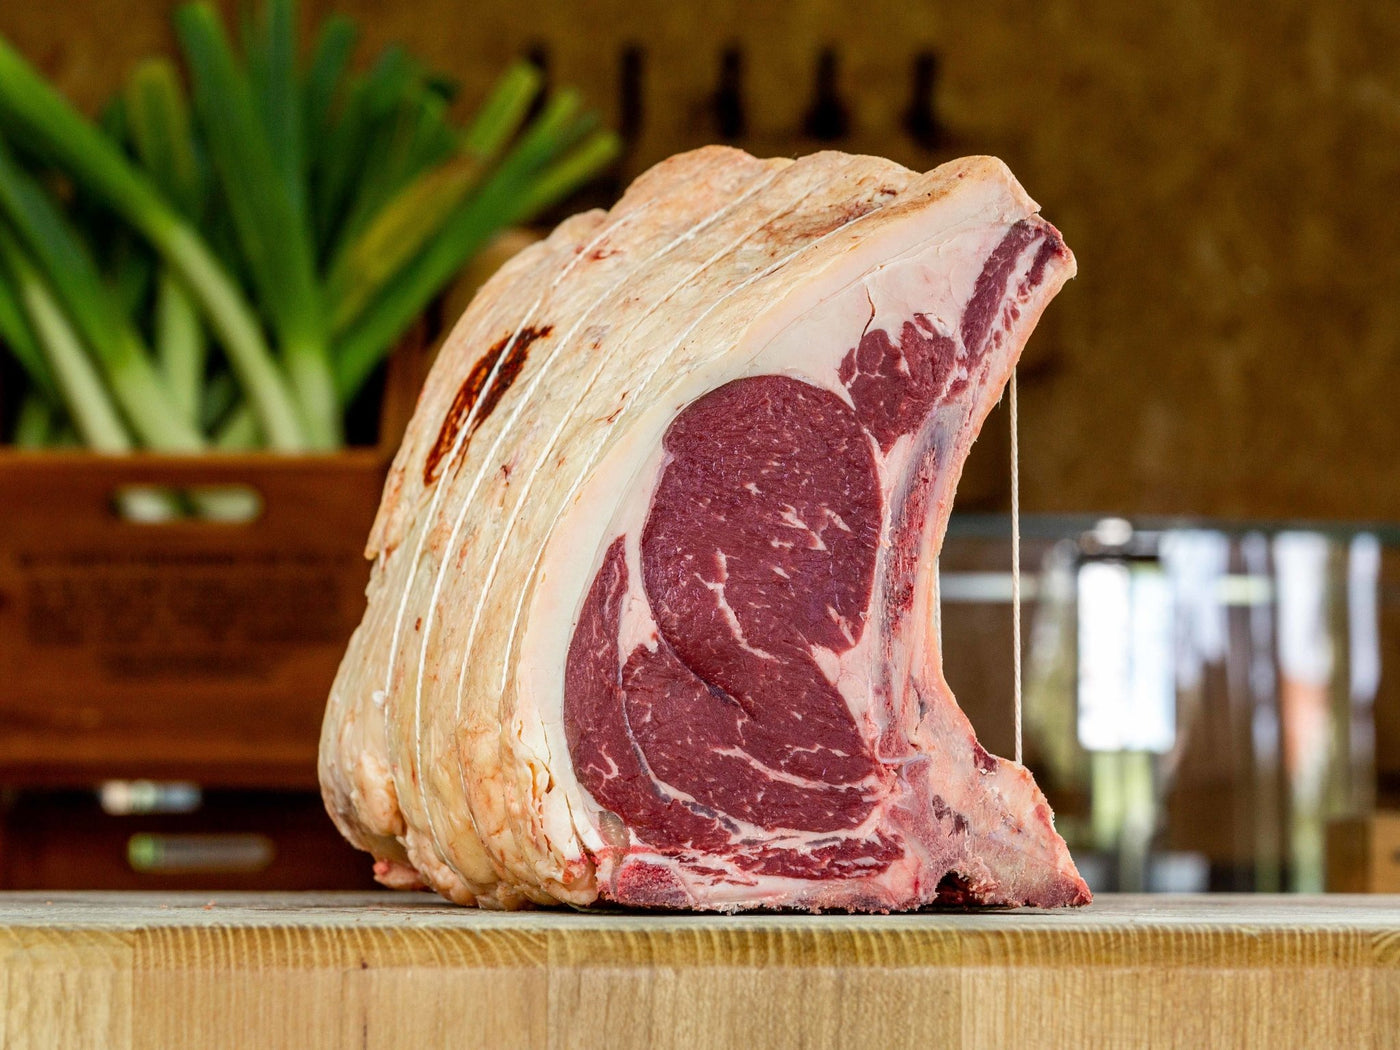 Grass Fed, Dry-Aged Wing Rib Roast, With All The Trimmings - Beef - Thomas Joseph Butchery - Ethical Dry-Aged Meat The Best Steak UK Thomas Joseph Butchery